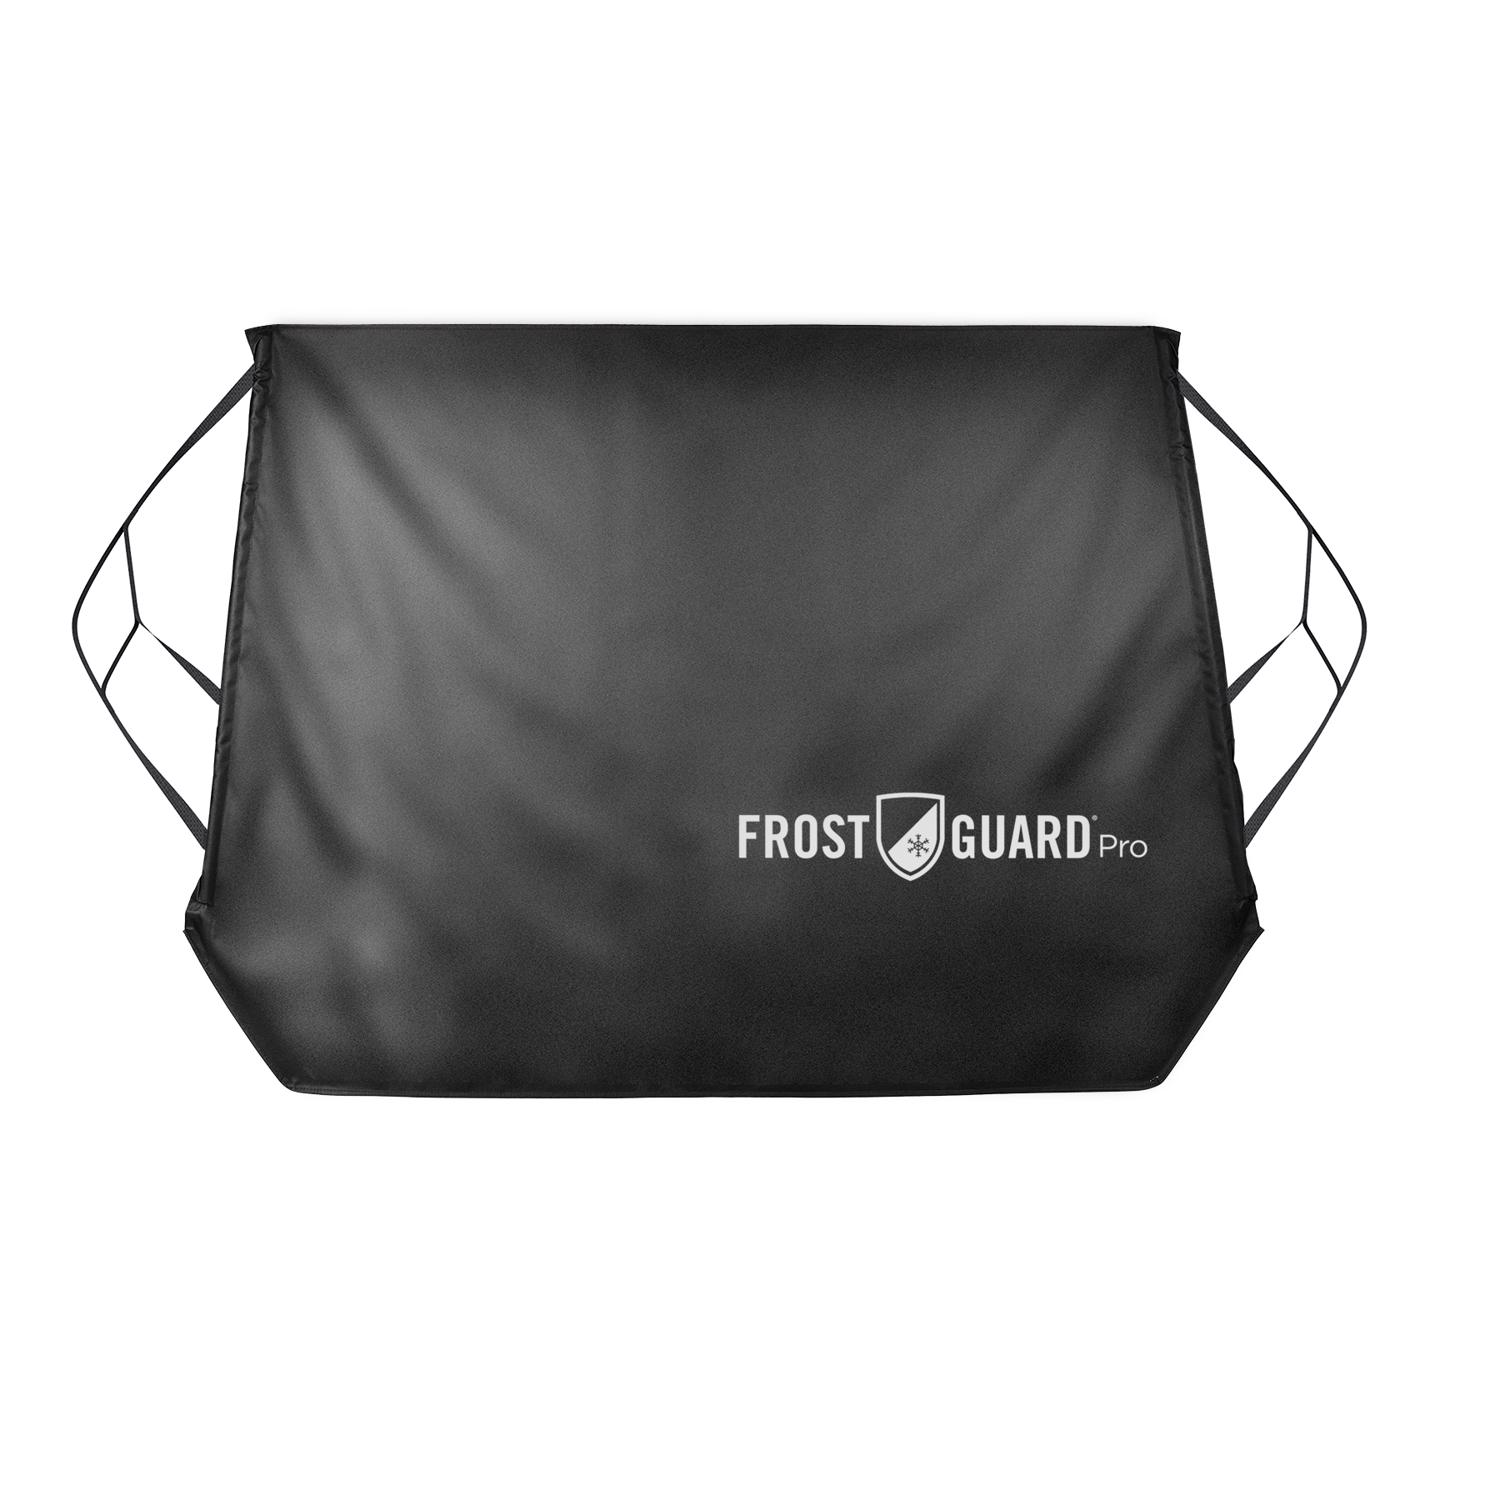 Frost Guard Go Windshield Cover for Snow and Ice, One Size